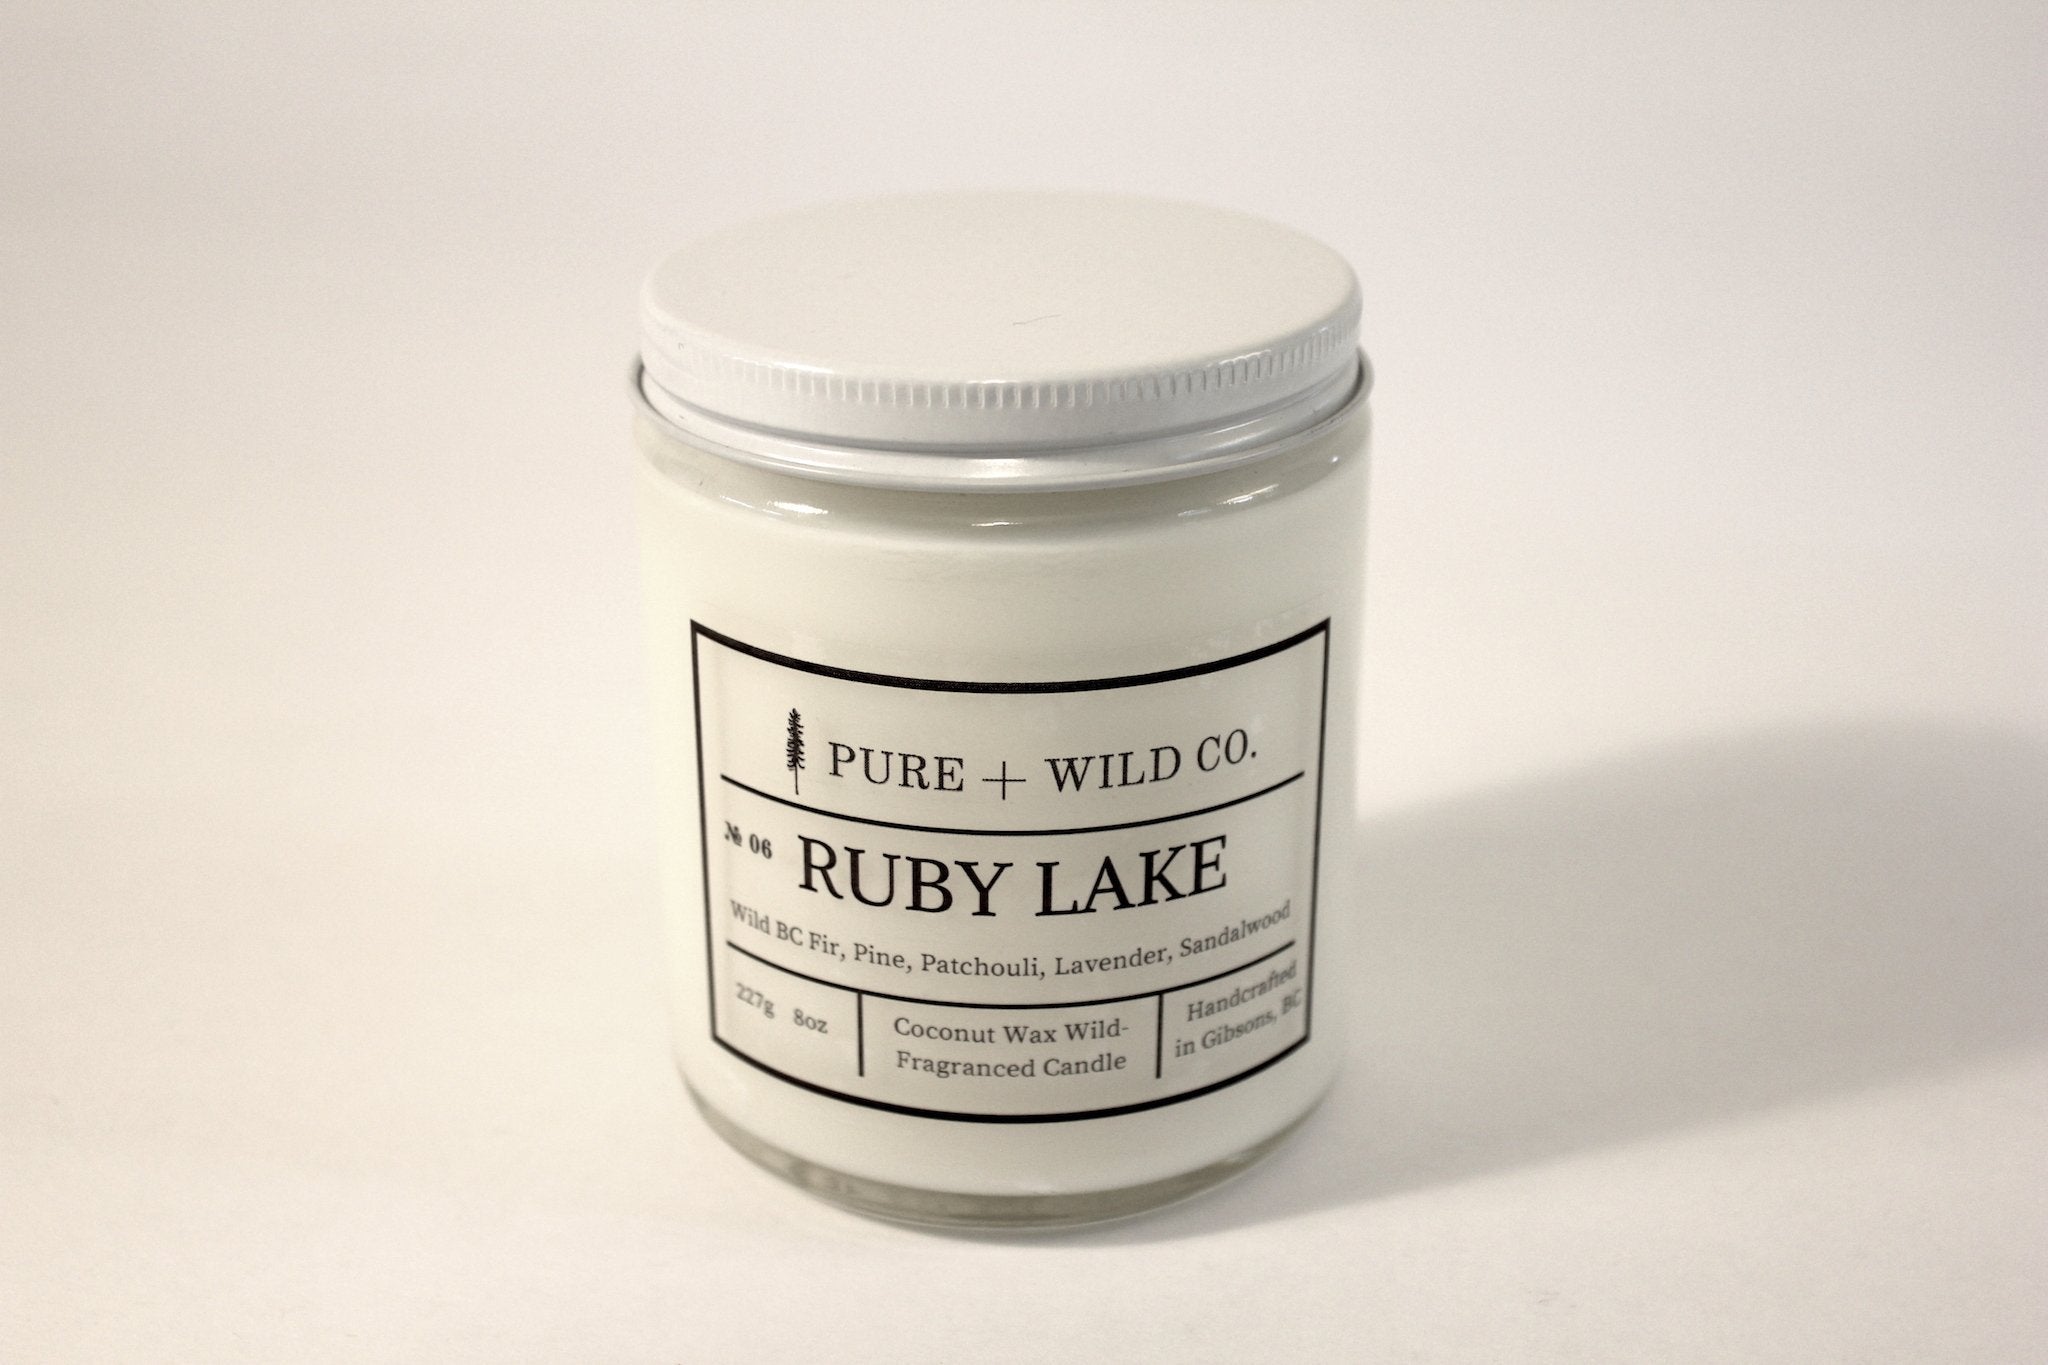 № 06 RUBY LAKE - Fir, Pine Resin, Patchouli, Sandalwood, Spice PURE + WILD CO. 